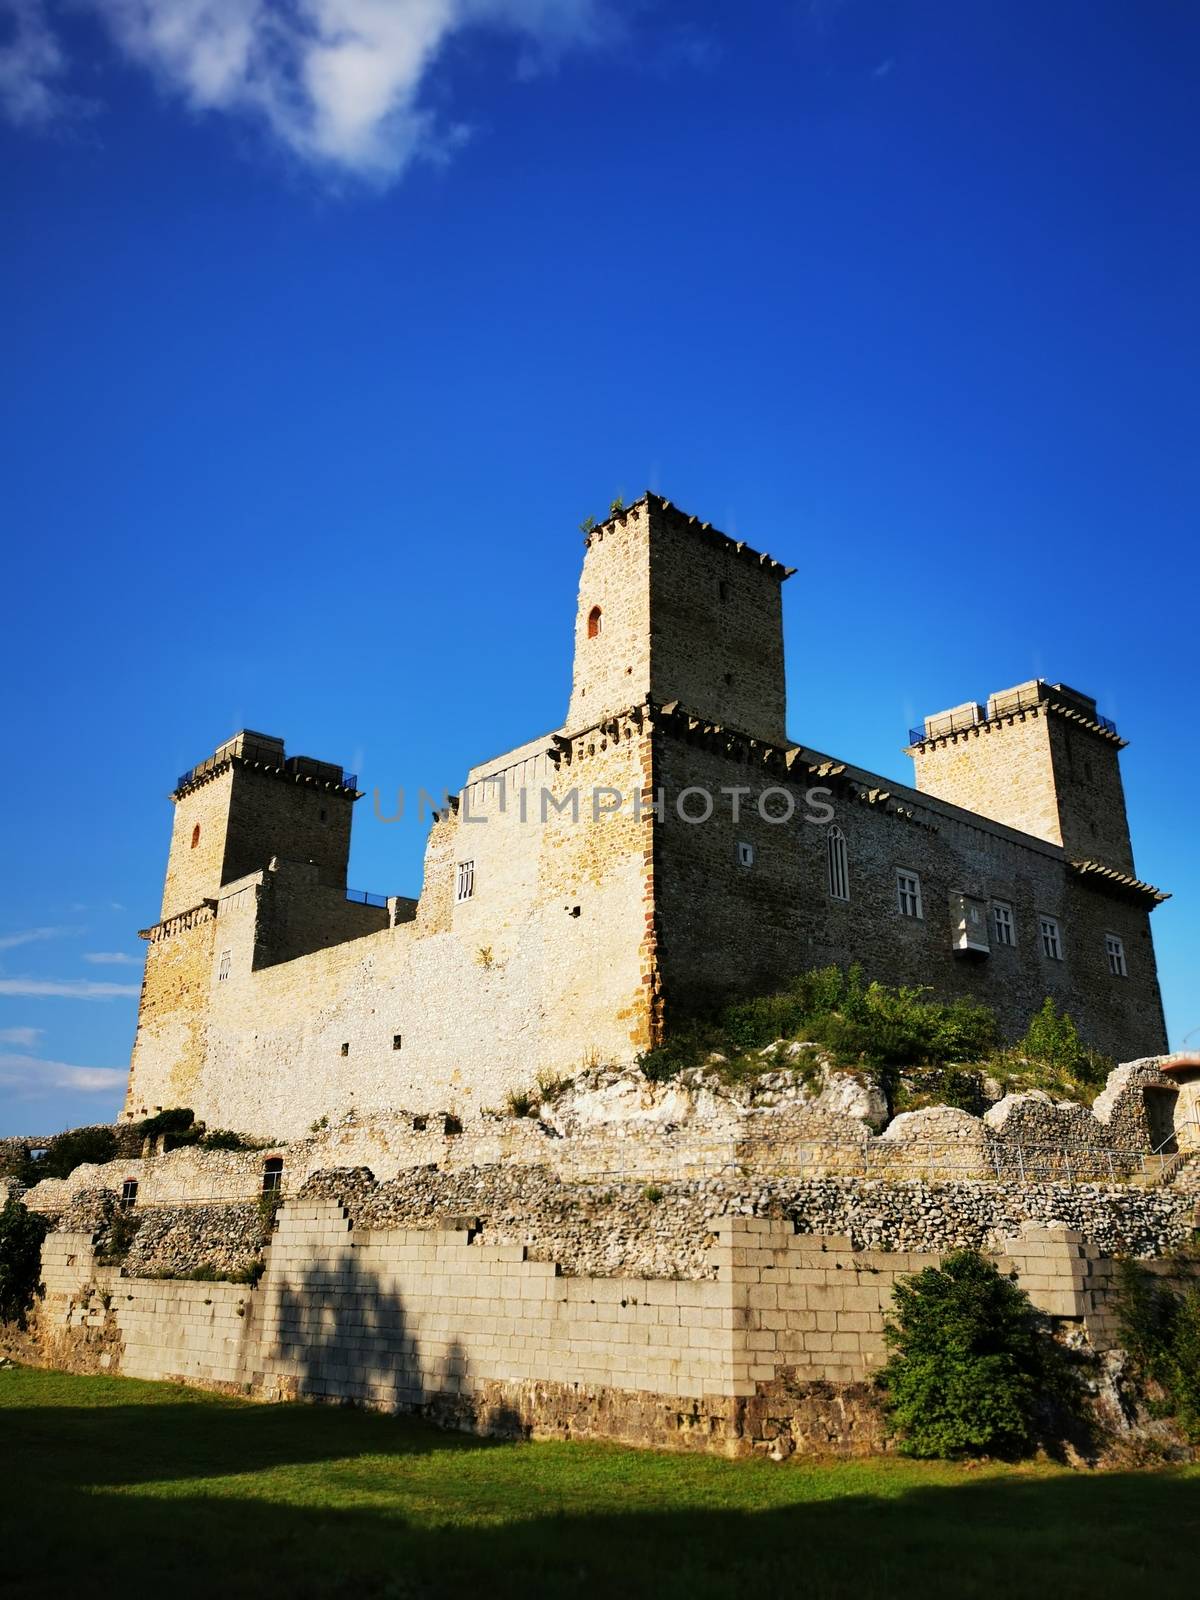 A castle on top of a stone building. High quality photo